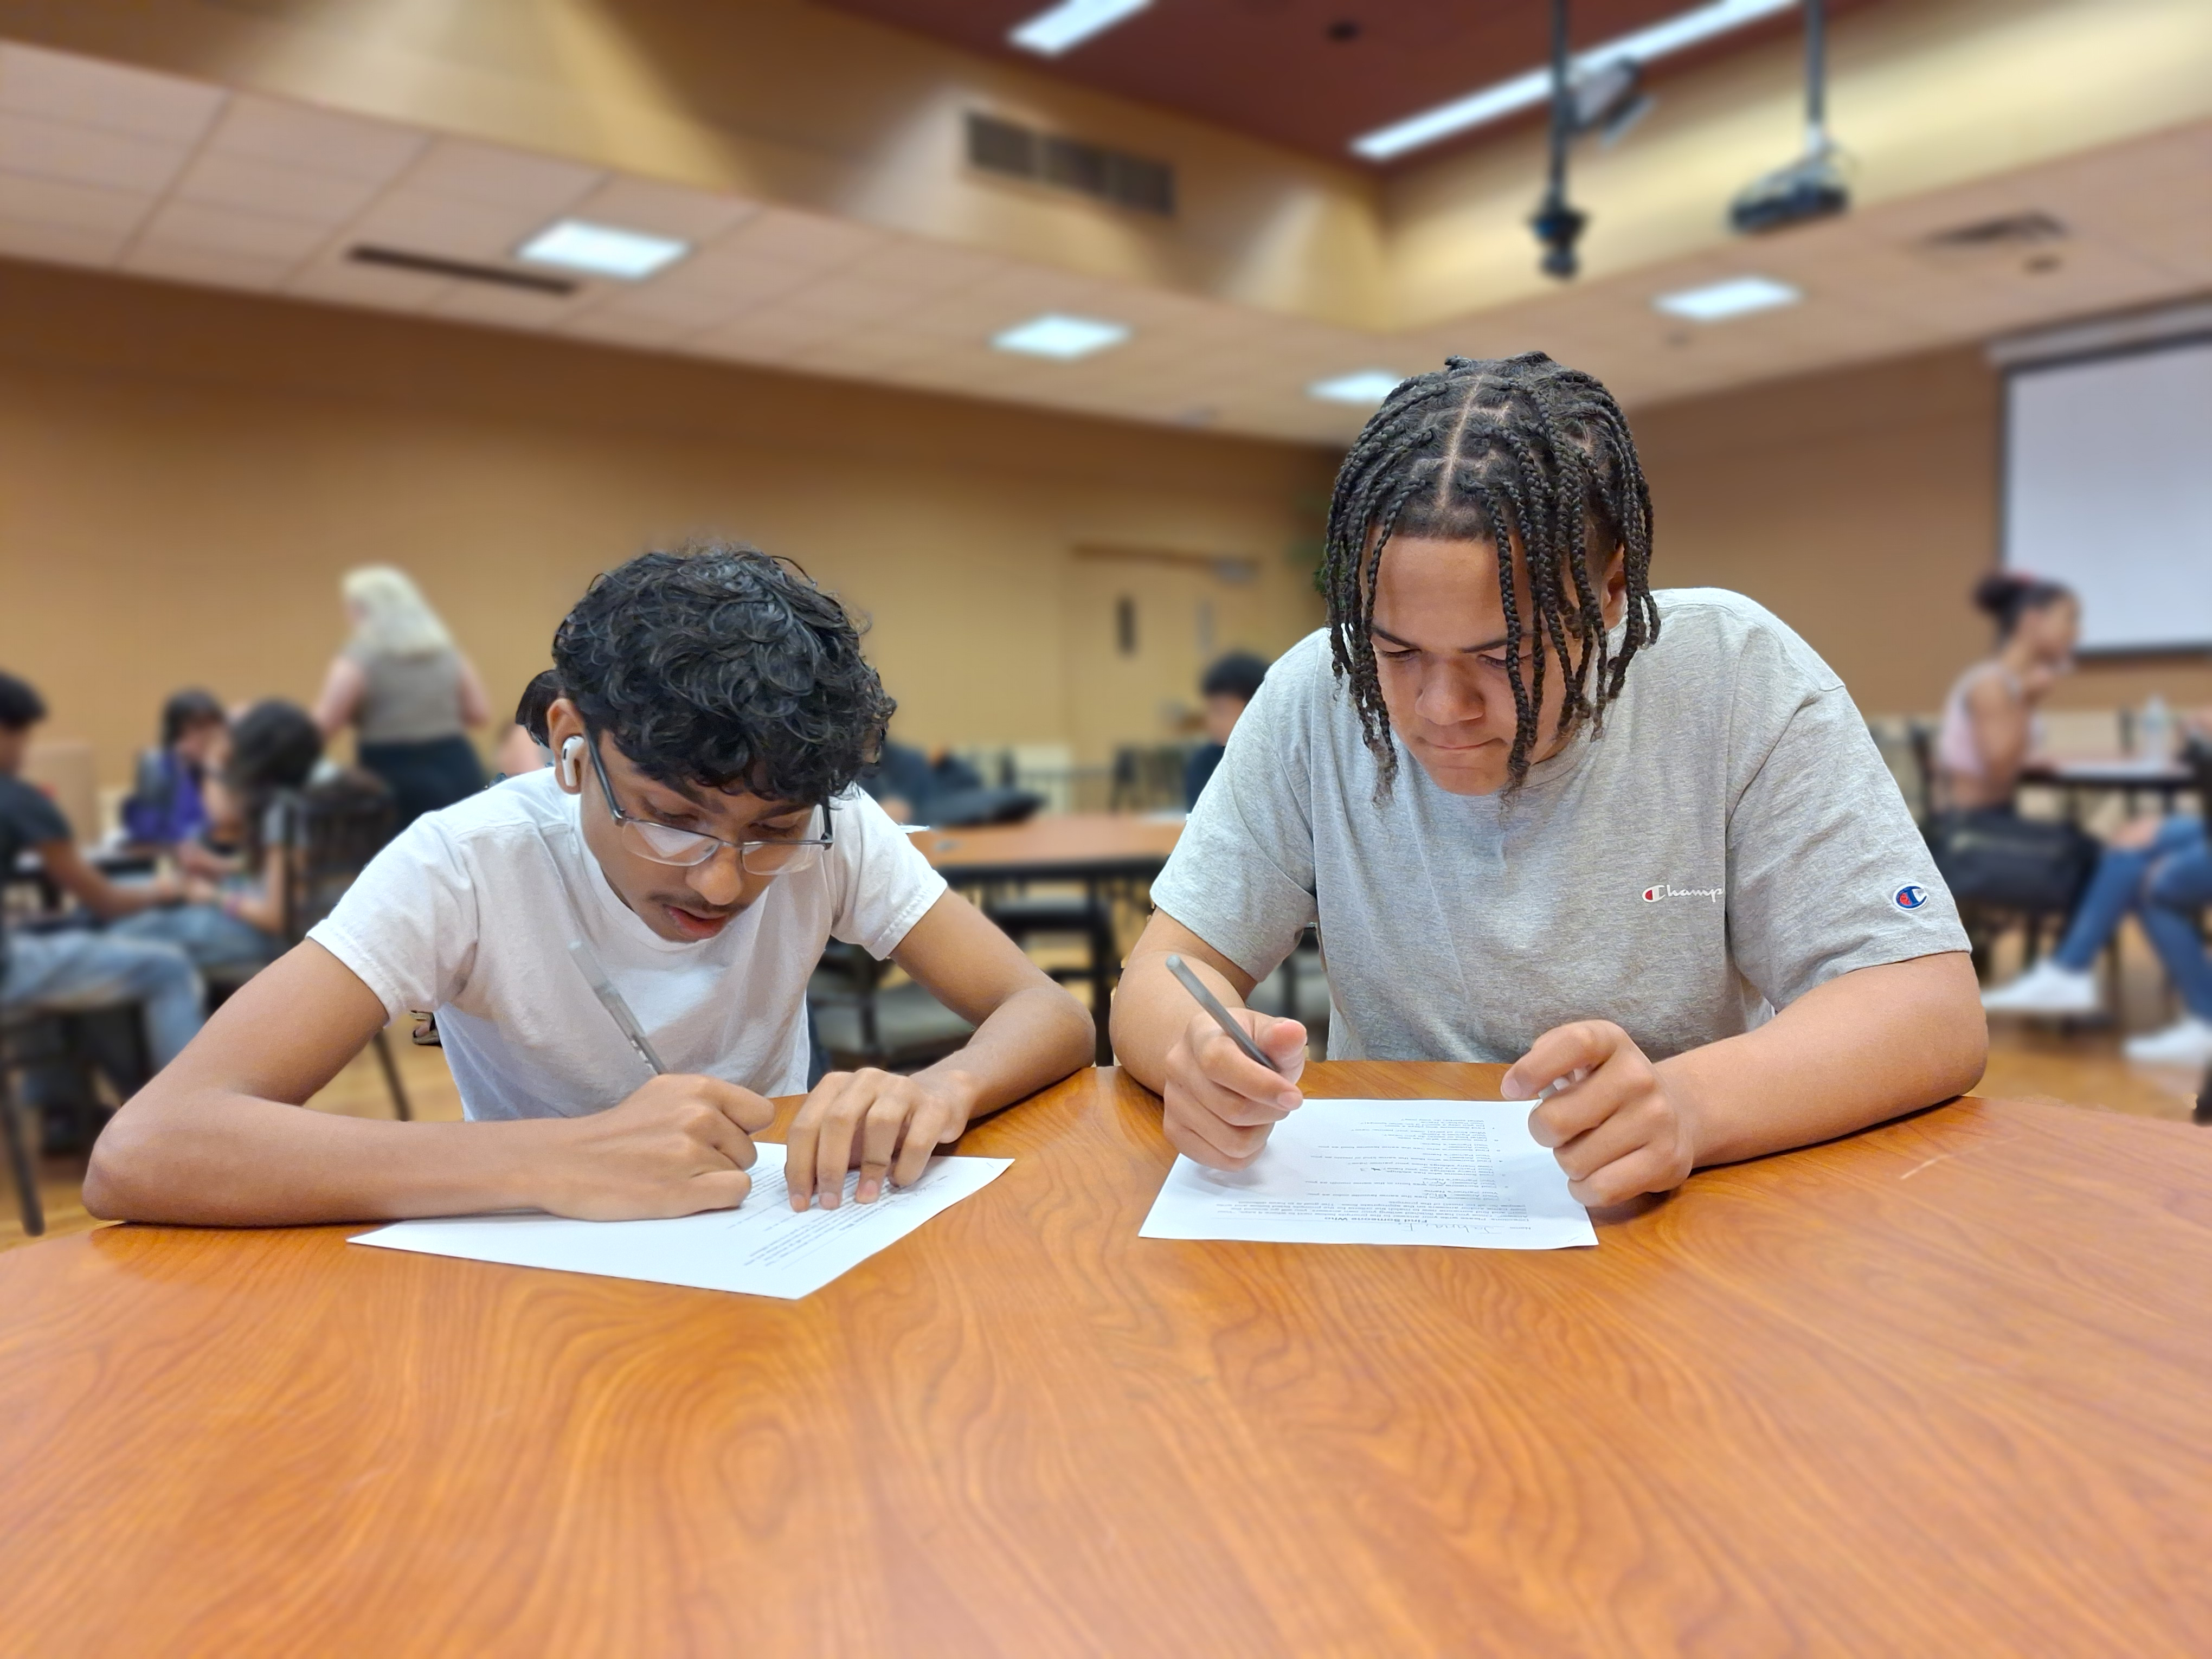 Two students writing on paper at table